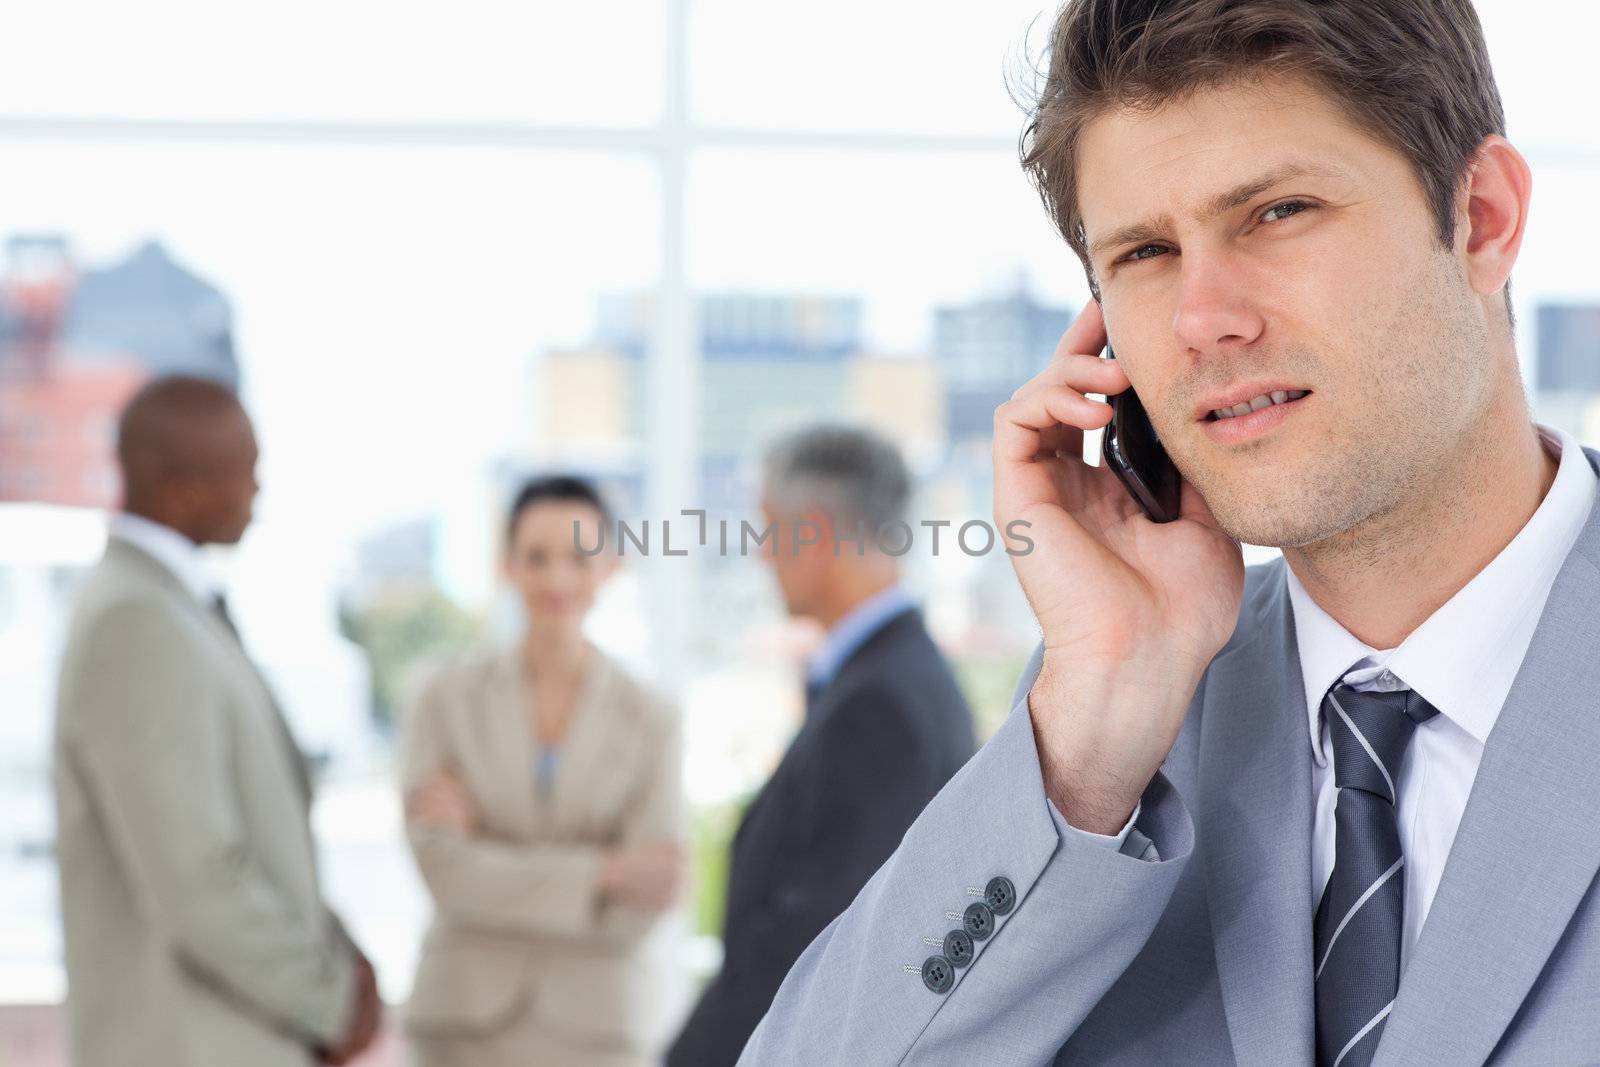 Young executive seriously looking straight ahead while using a mobile phone